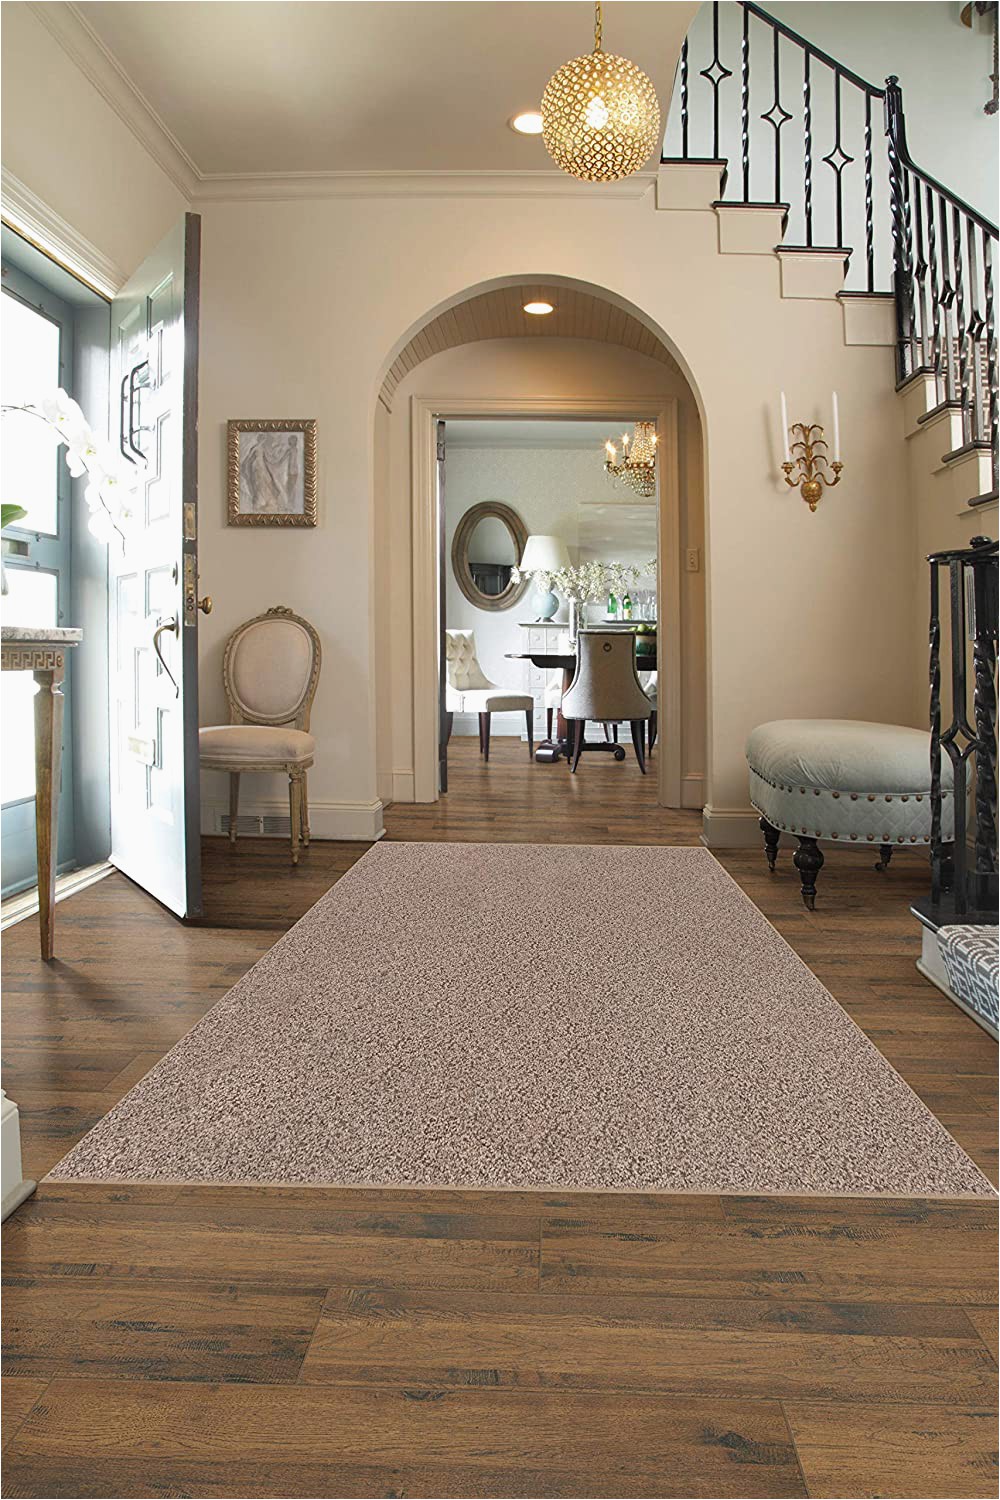 10 Feet by 12 Feet area Rugs Square 12 X12 Indoor area Rug Oyster Bay 32oz Plush Textured Carpet for Residential or Mercial Use with Premium Bound Polyester Edges